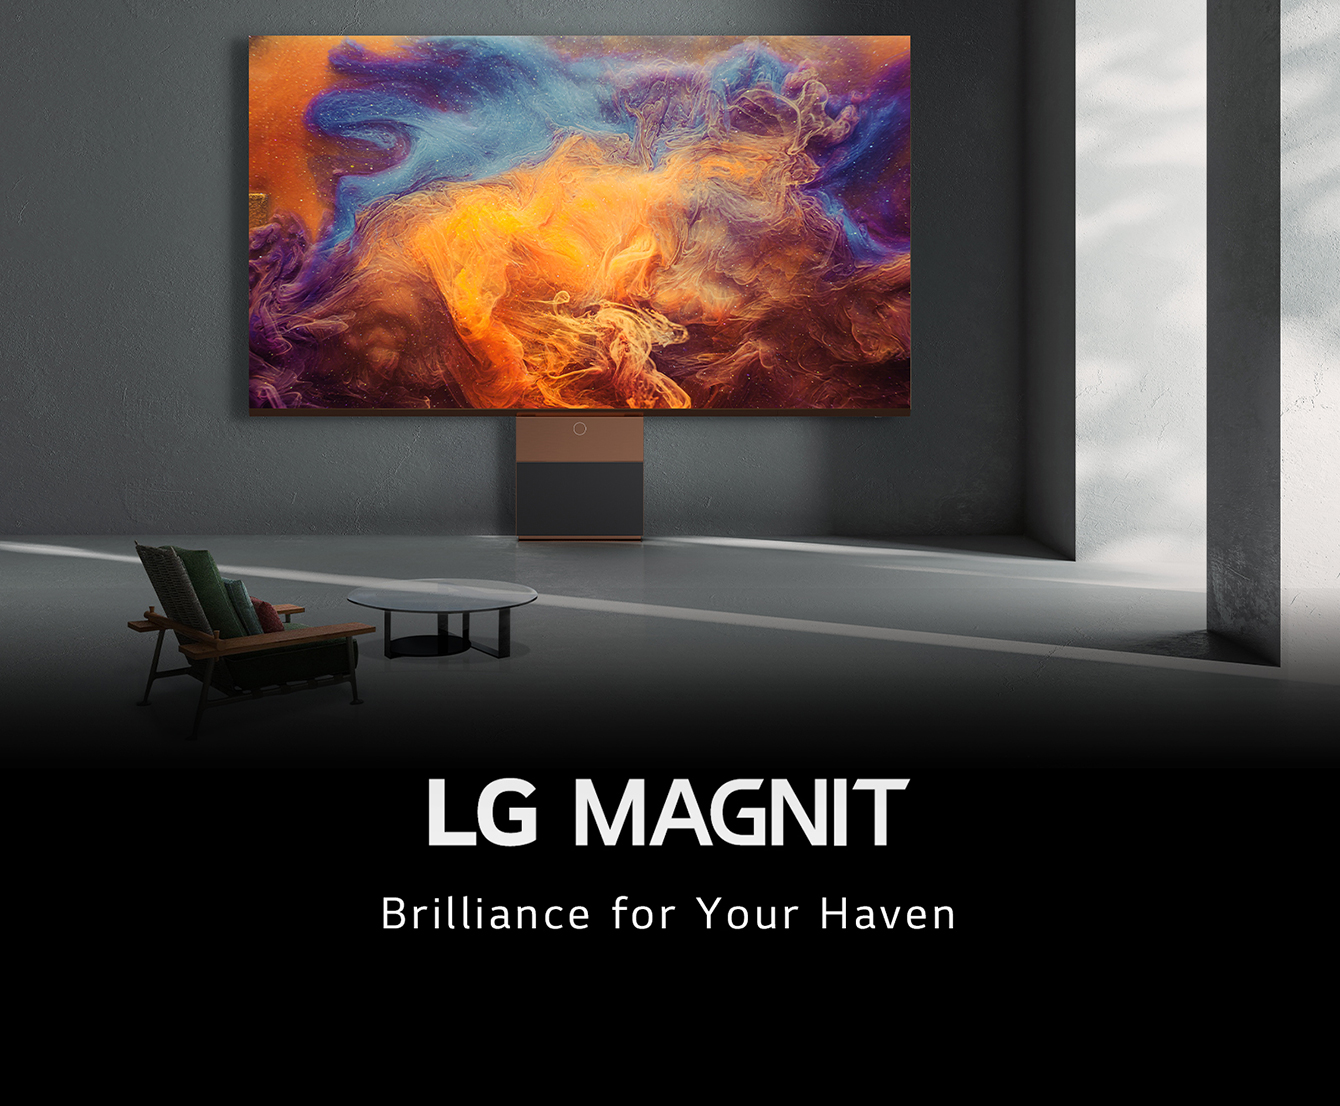 It’s an LG MAGNIT expressing splendid colors in great detail. LG MAGNIT's sleek design nicely harmonizes with the interior space.